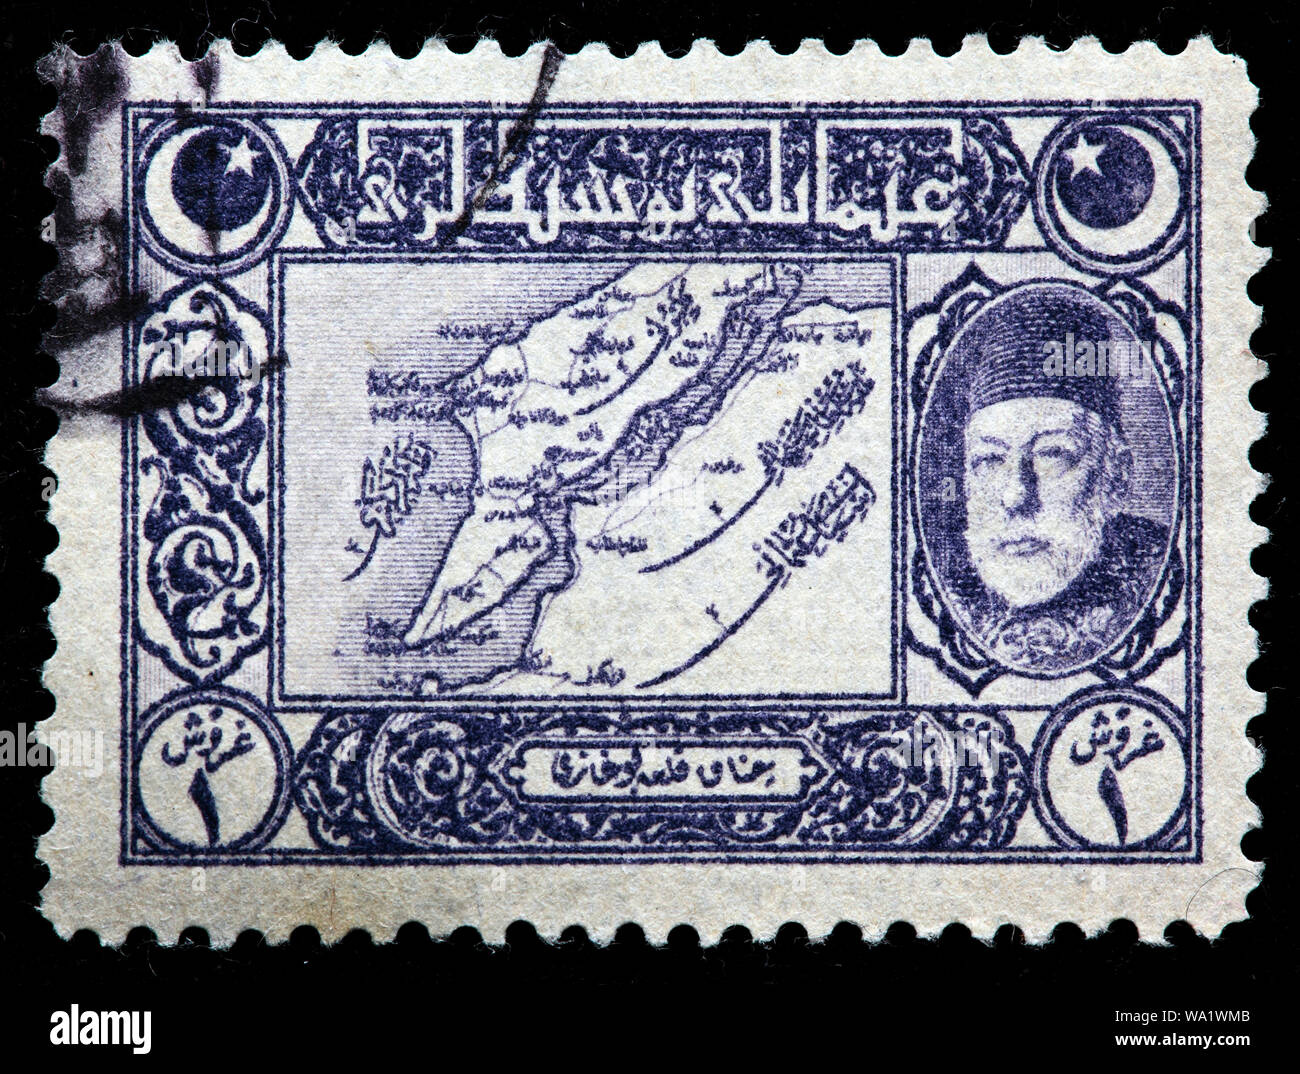 Mehmed V (1844-1918), Ottoman Sultan and Map of Dardanelles, postage stamp, Turkey, 1917 Stock Photo